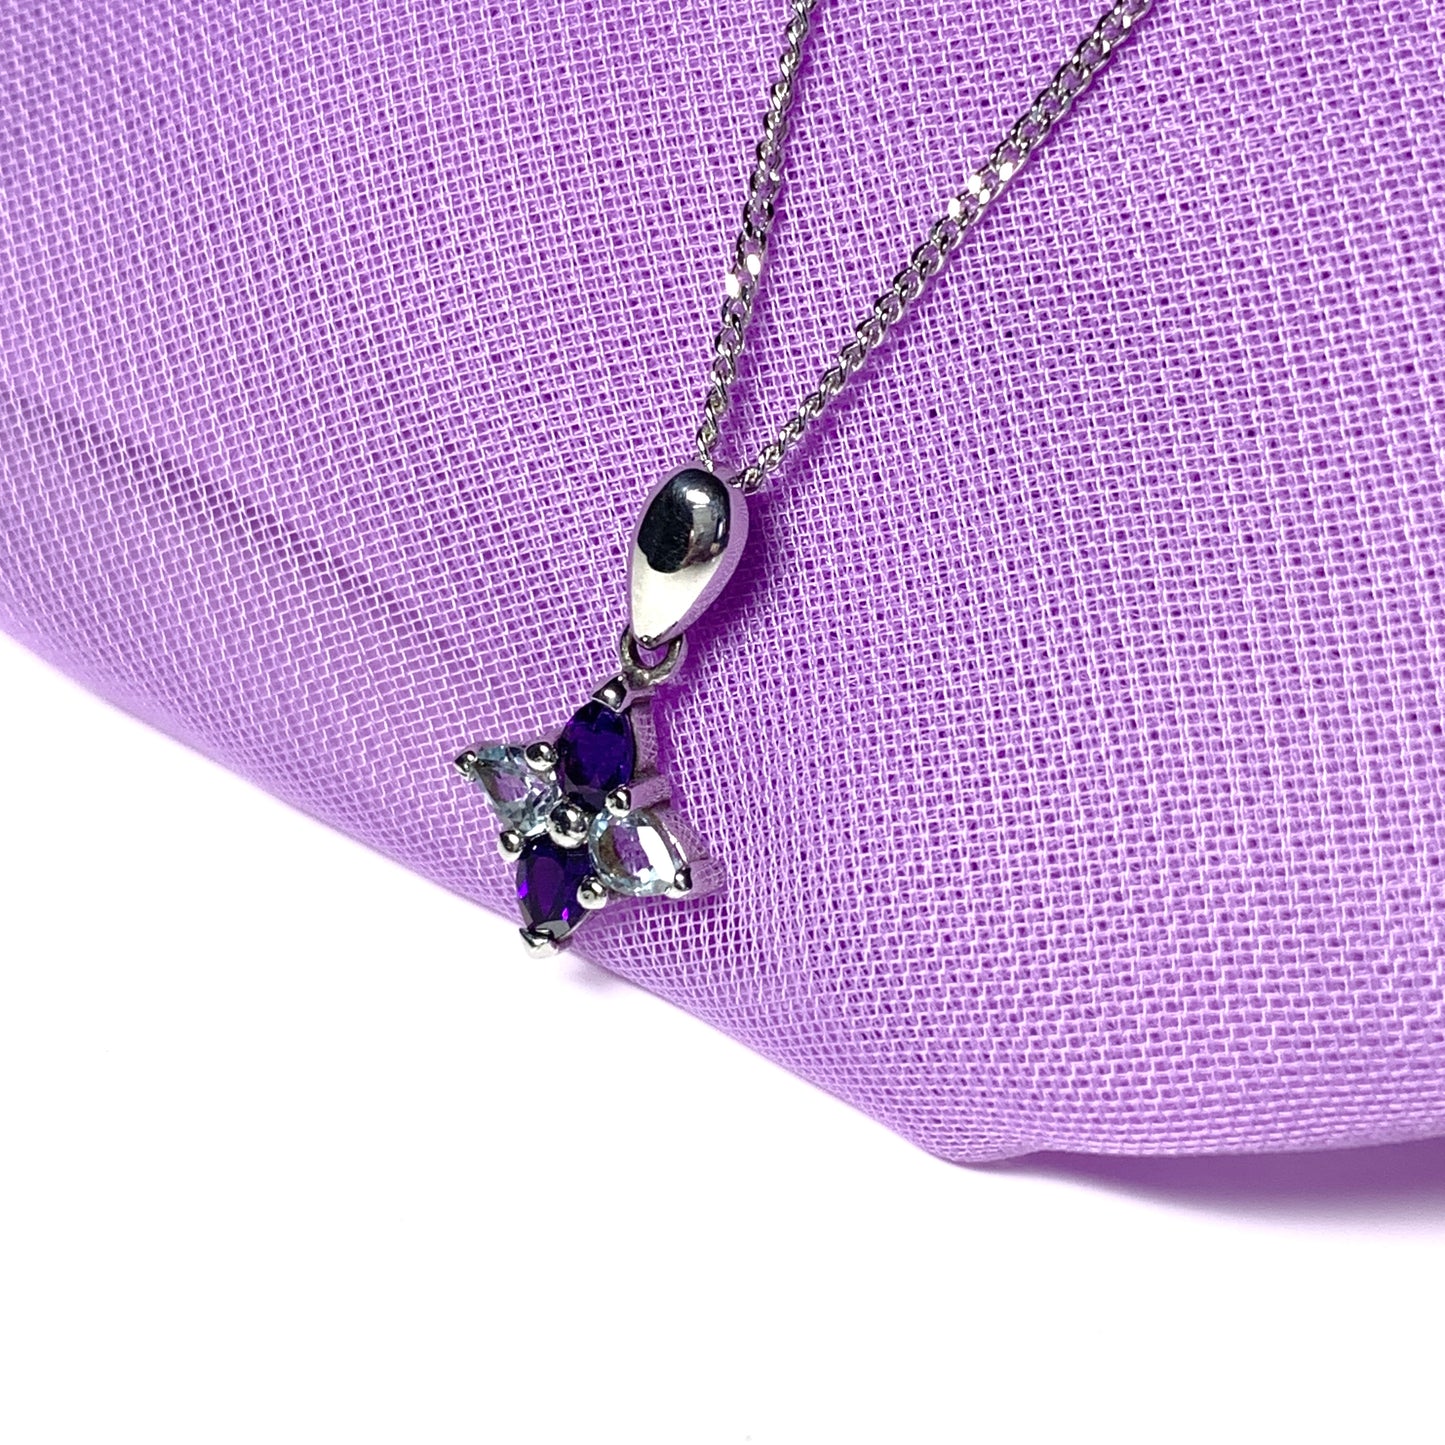 Amethyst and blue topaz necklace pendant]